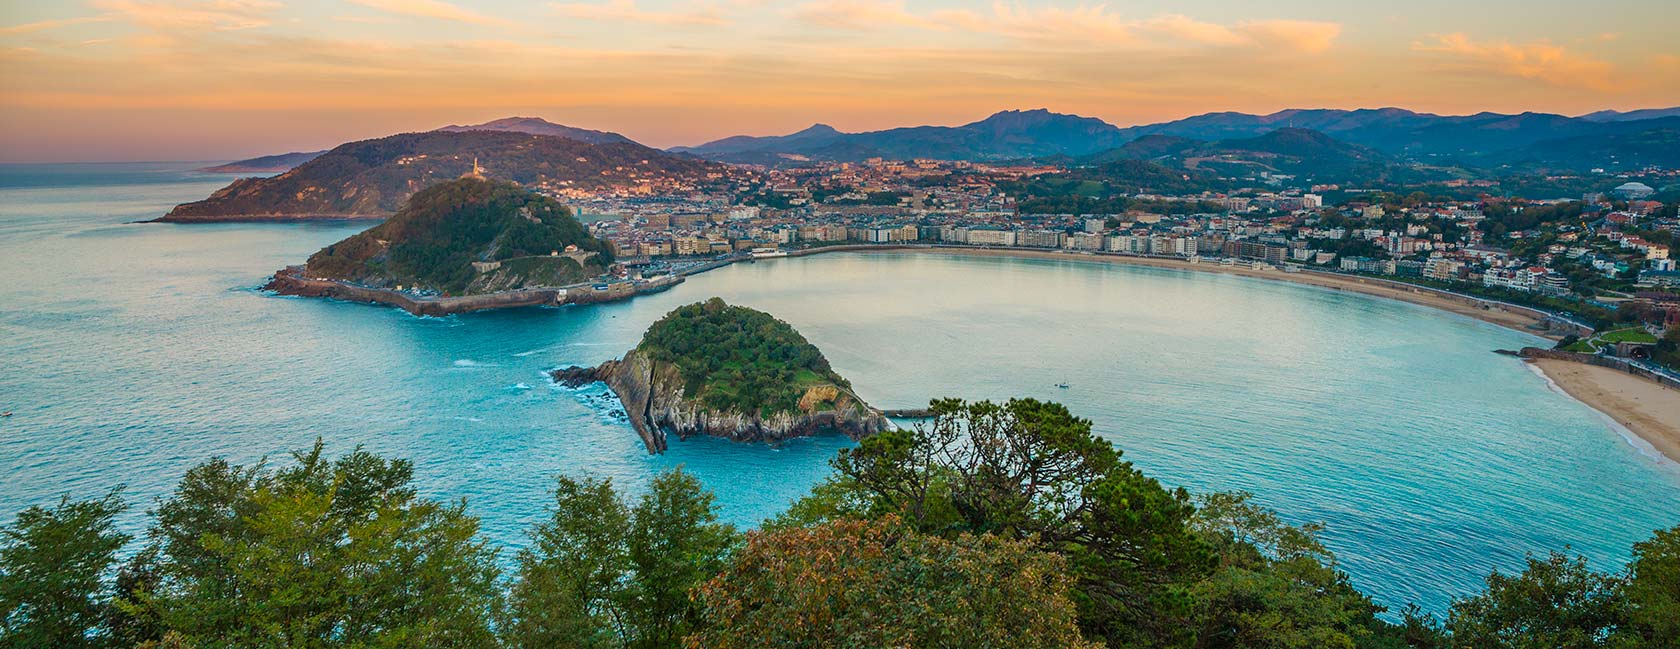 10 reasons to choose San Sebastian to host your event